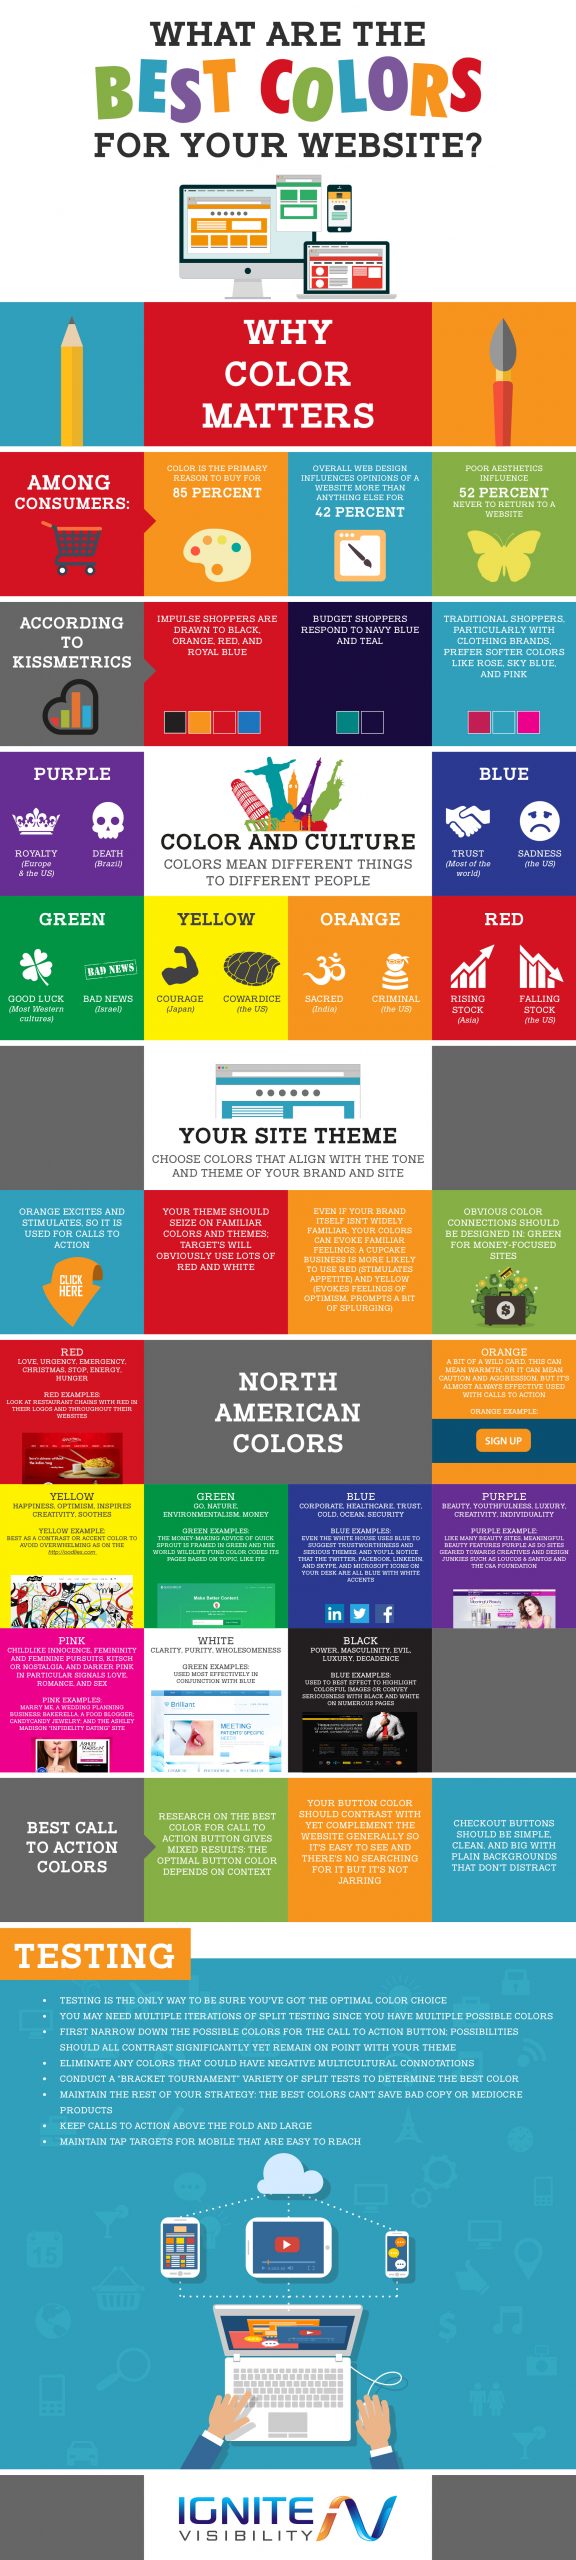 What are the Best Colors for your Website?